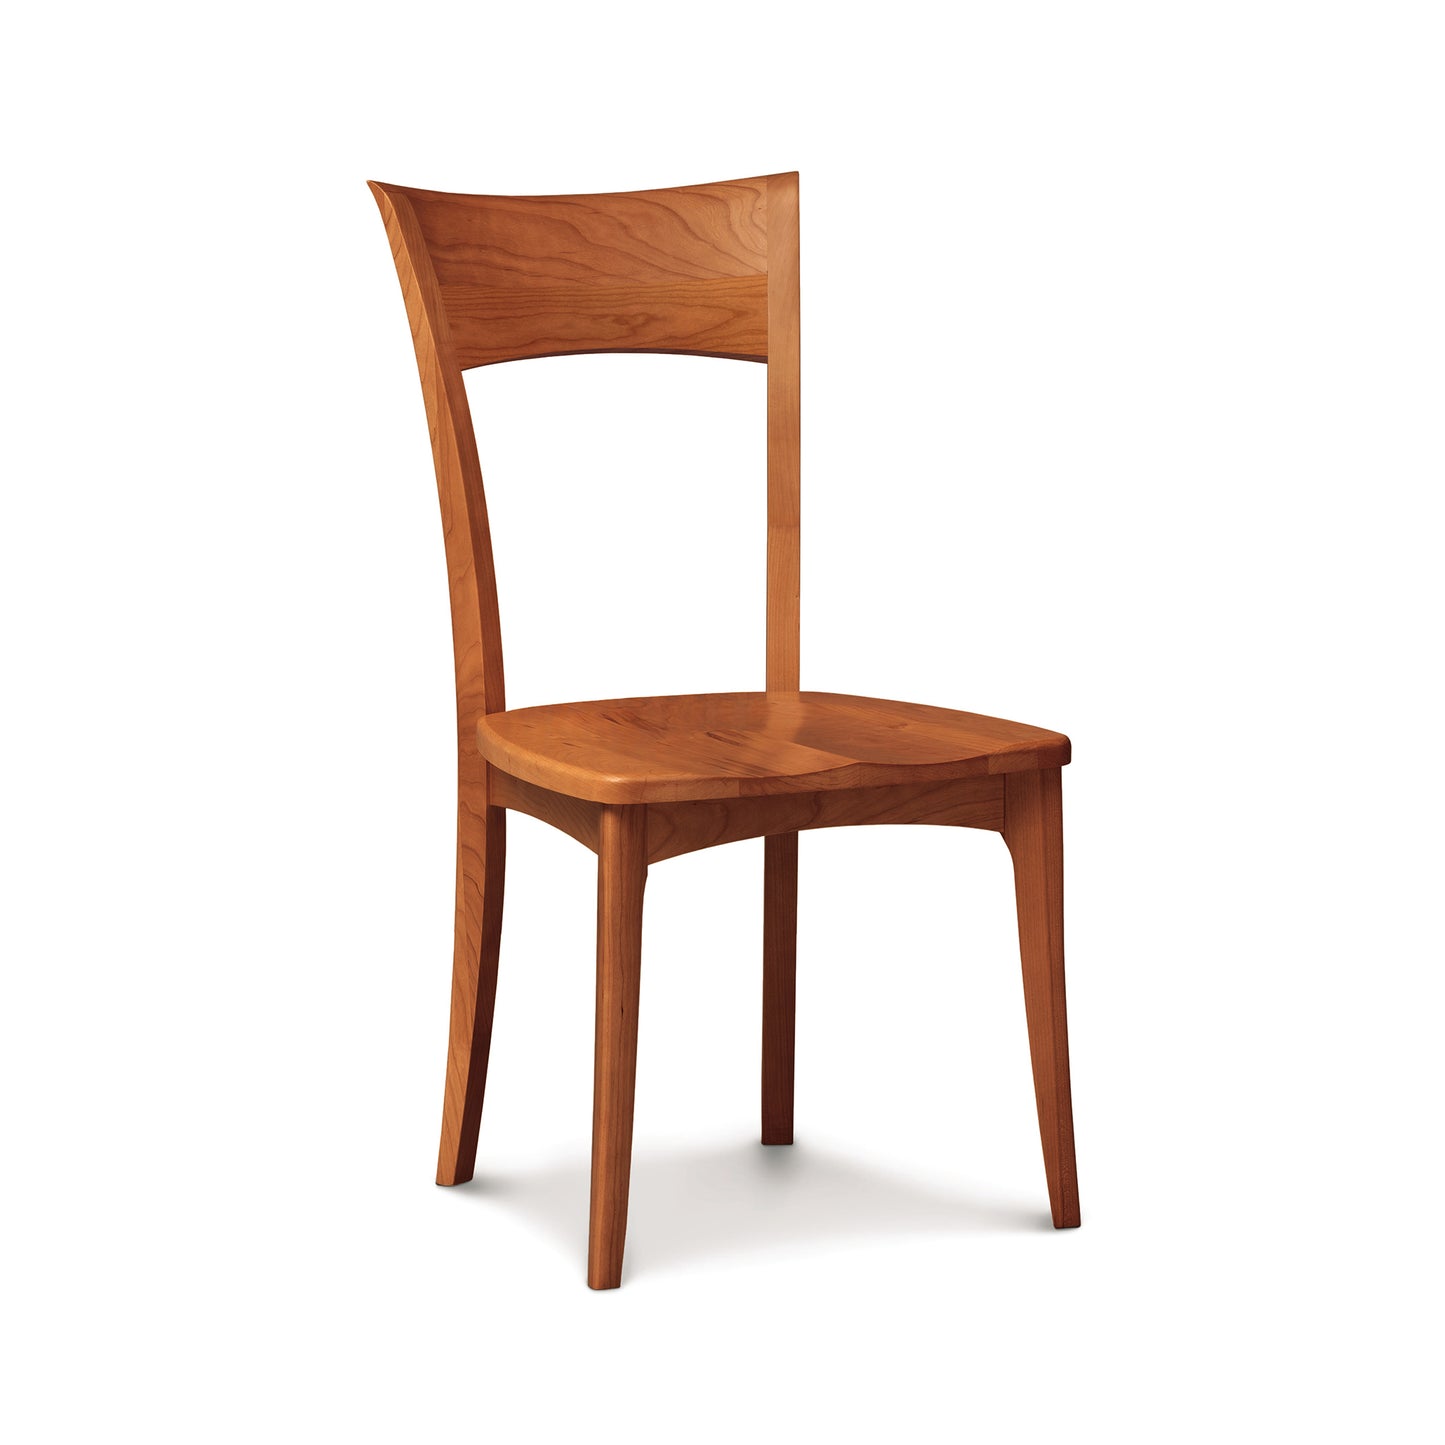 A Ingrid Shaker dining chair with wood seat, crafted from American cherry wood, with a curved backrest and four legs, placed against a white background.